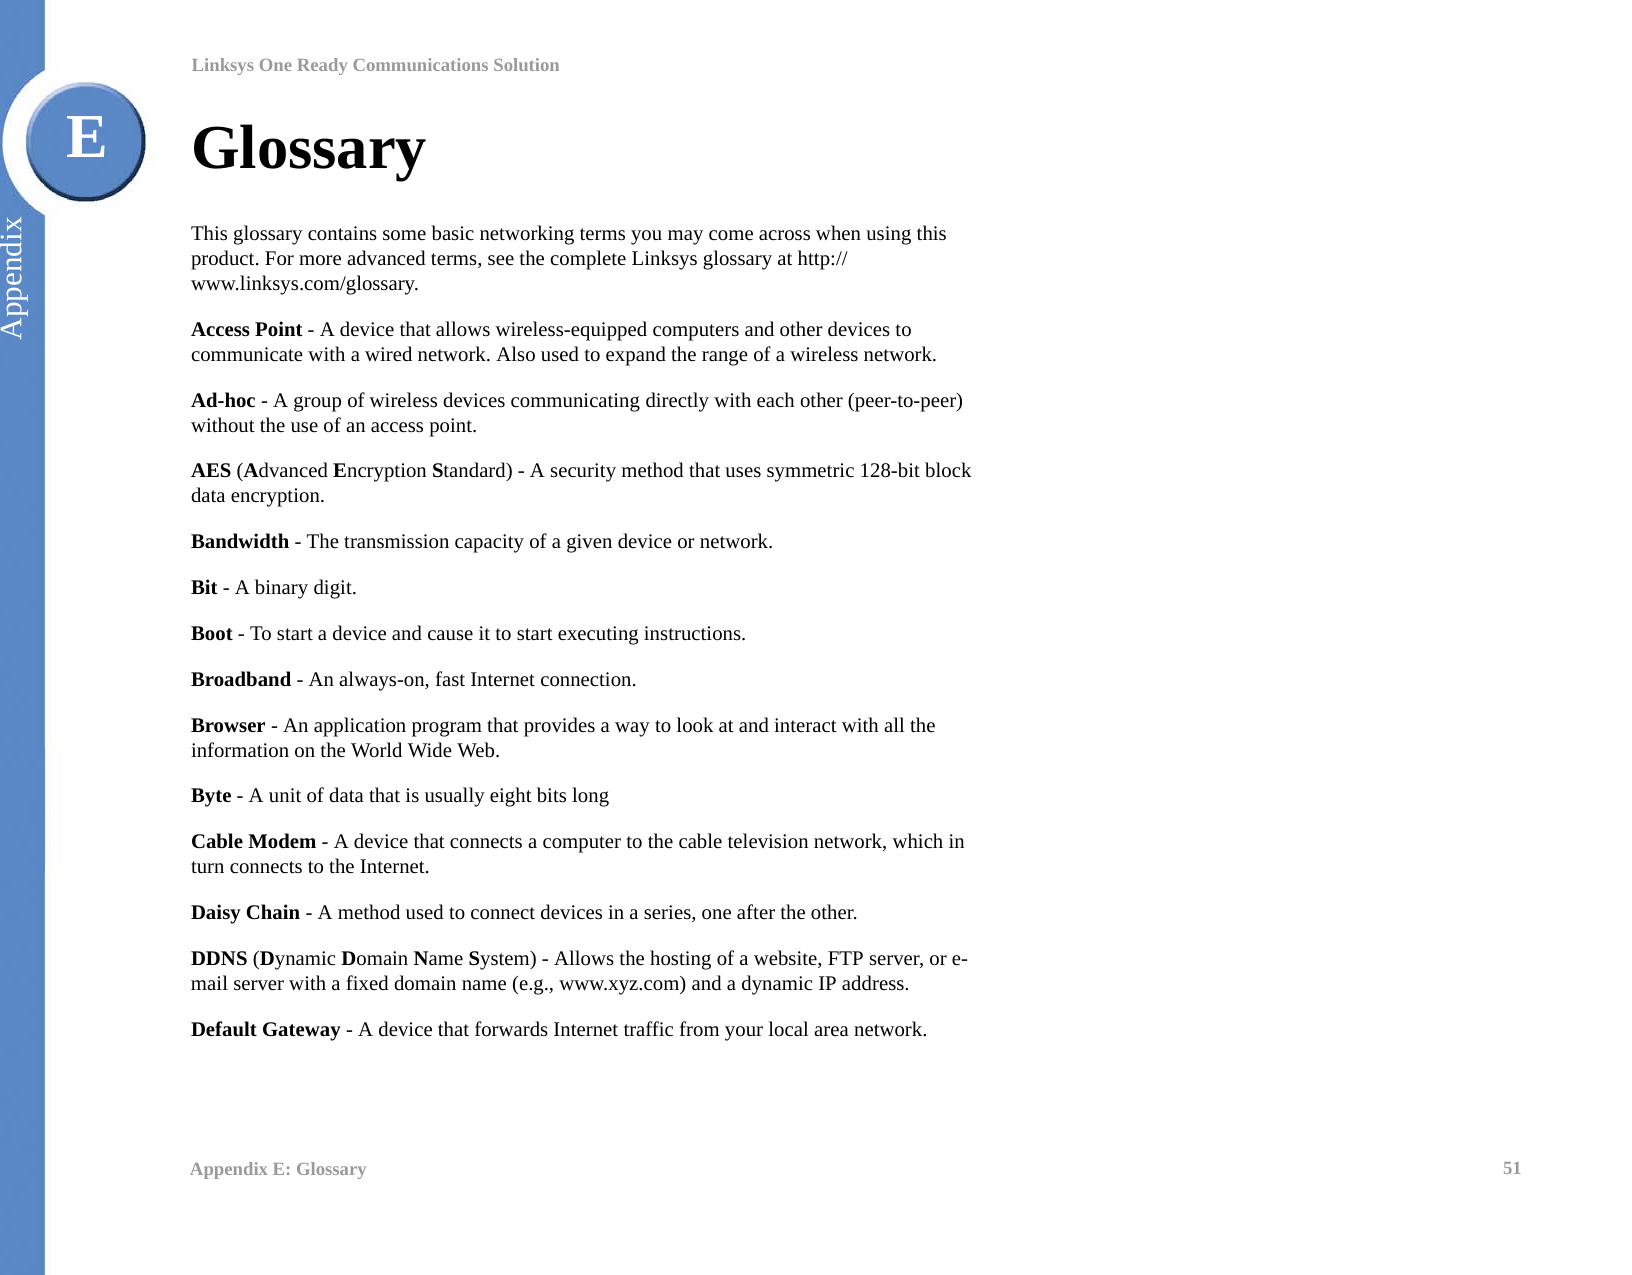 51Appendix E: GlossaryLinksys One Ready Communications SolutionAppendixEGlossaryThis glossary contains some basic networking terms you may come across when using this product. For more advanced terms, see the complete Linksys glossary at http://www.linksys.com/glossary.Access Point - A device that allows wireless-equipped computers and other devices to communicate with a wired network. Also used to expand the range of a wireless network.Ad-hoc - A group of wireless devices communicating directly with each other (peer-to-peer) without the use of an access point.AES (Advanced Encryption Standard) - A security method that uses symmetric 128-bit block data encryption.Bandwidth - The transmission capacity of a given device or network.Bit - A binary digit.Boot - To start a device and cause it to start executing instructions.Broadband - An always-on, fast Internet connection.Browser - An application program that provides a way to look at and interact with all the information on the World Wide Web. Byte - A unit of data that is usually eight bits longCable Modem - A device that connects a computer to the cable television network, which in turn connects to the Internet.Daisy Chain - A method used to connect devices in a series, one after the other.DDNS (Dynamic Domain Name System) - Allows the hosting of a website, FTP server, or e-mail server with a fixed domain name (e.g., www.xyz.com) and a dynamic IP address.Default Gateway - A device that forwards Internet traffic from your local area network.